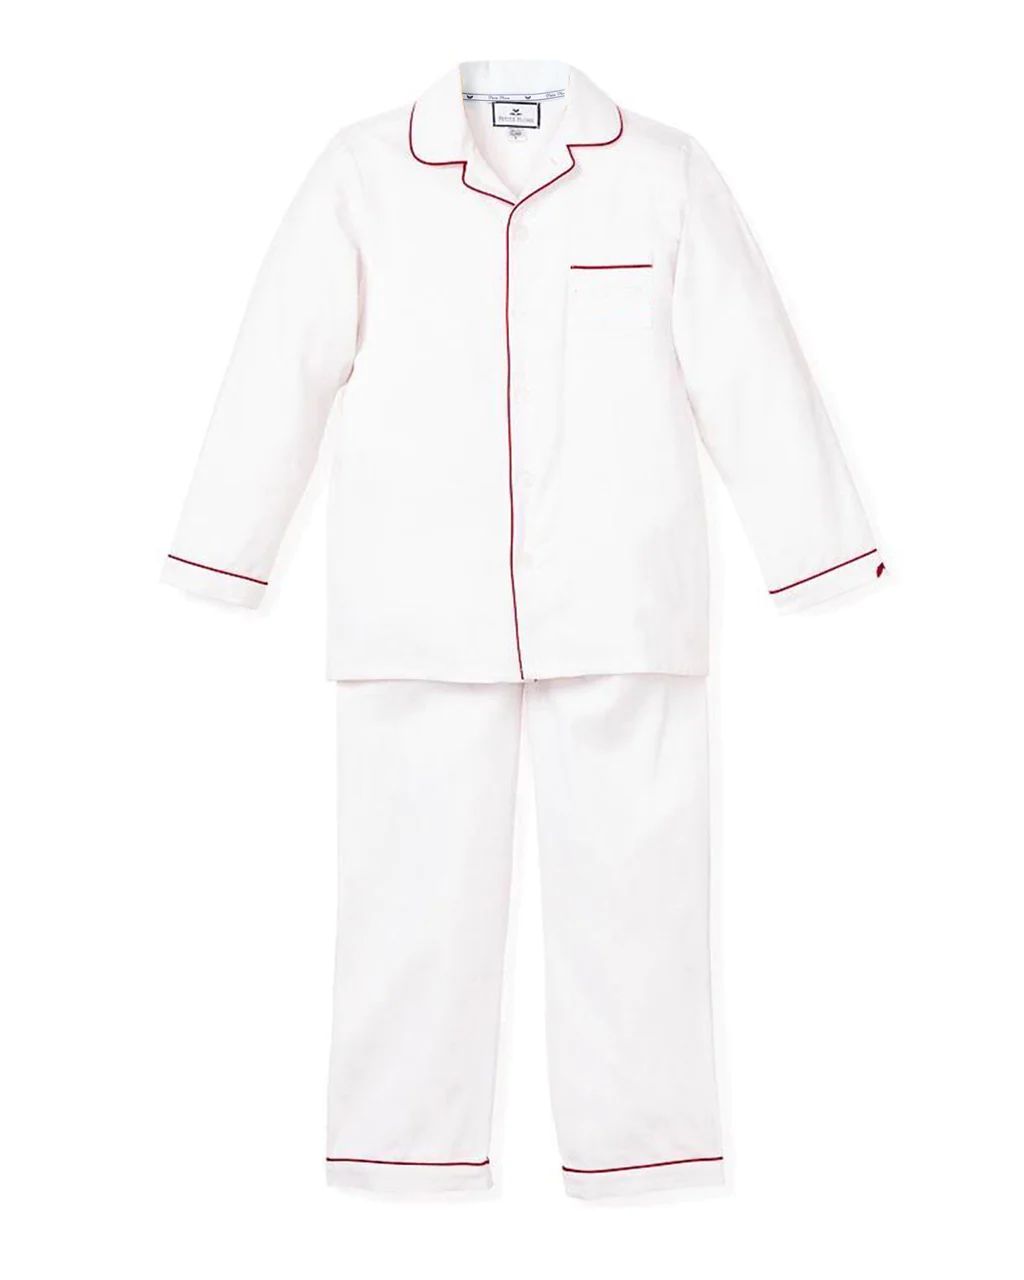 Children's  White Pajamas with Red Piping | Petite Plume